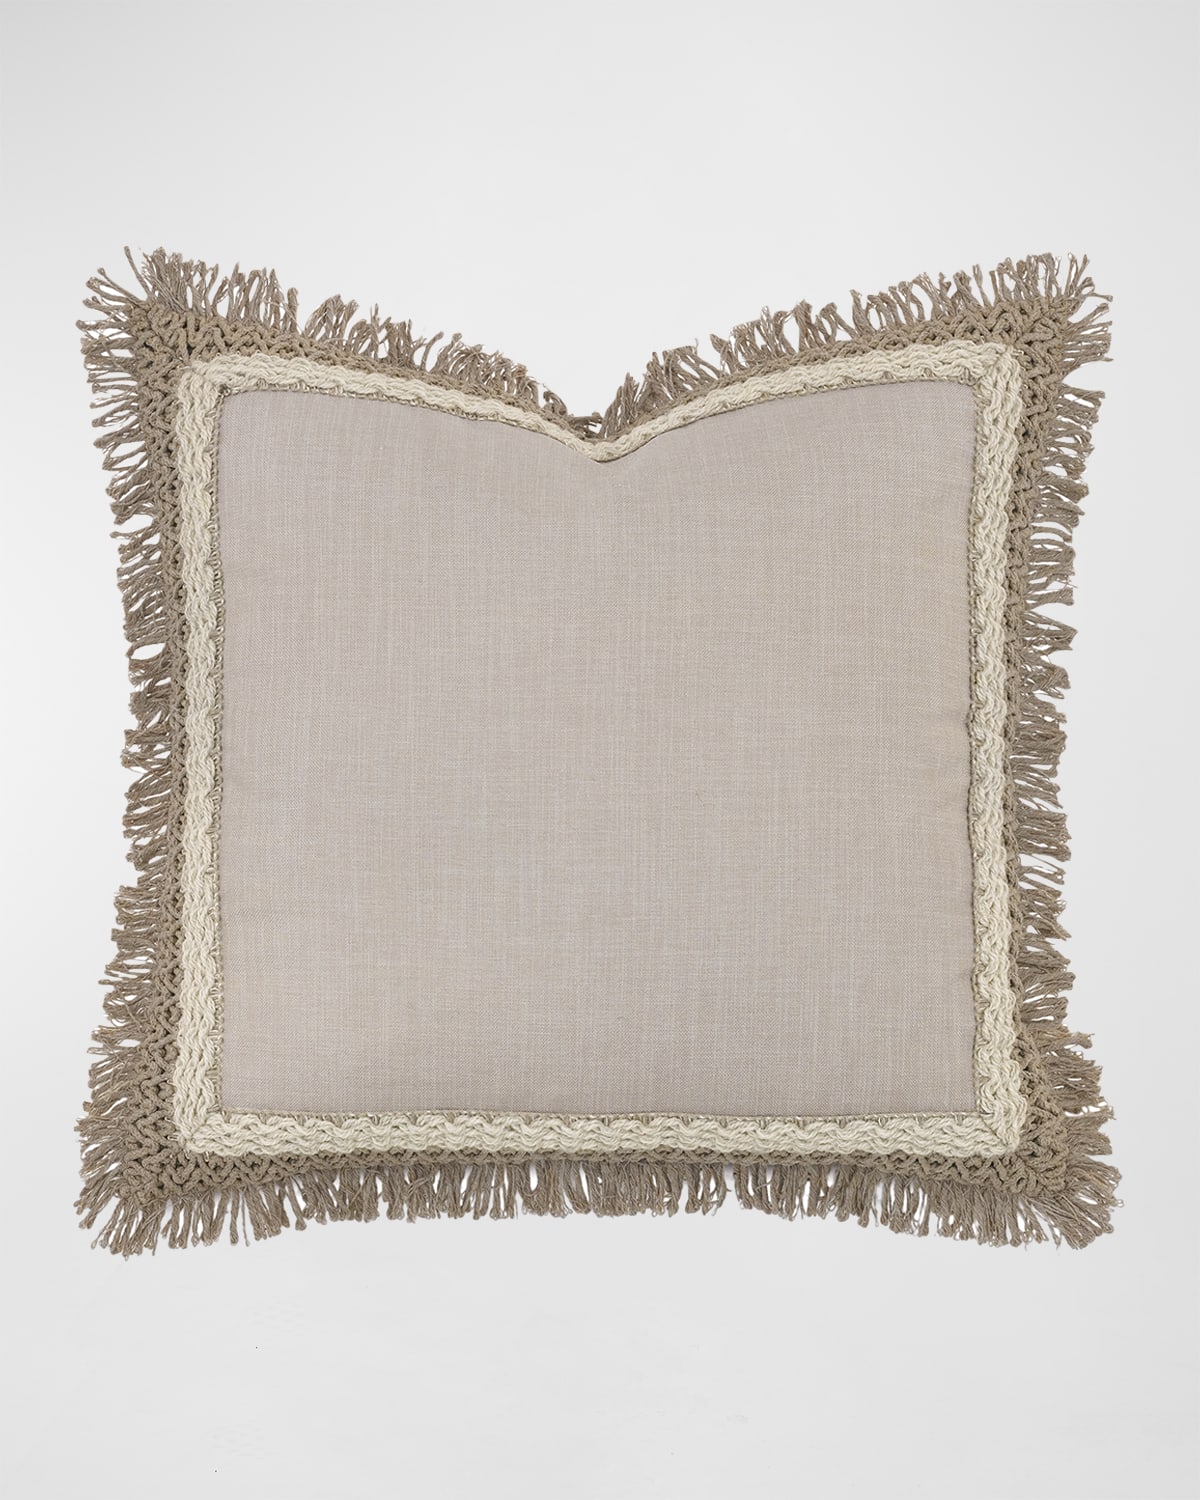 Barclay Butera By Eastern Accents Park City Woven Fringe Decorative Pillow In Neutral